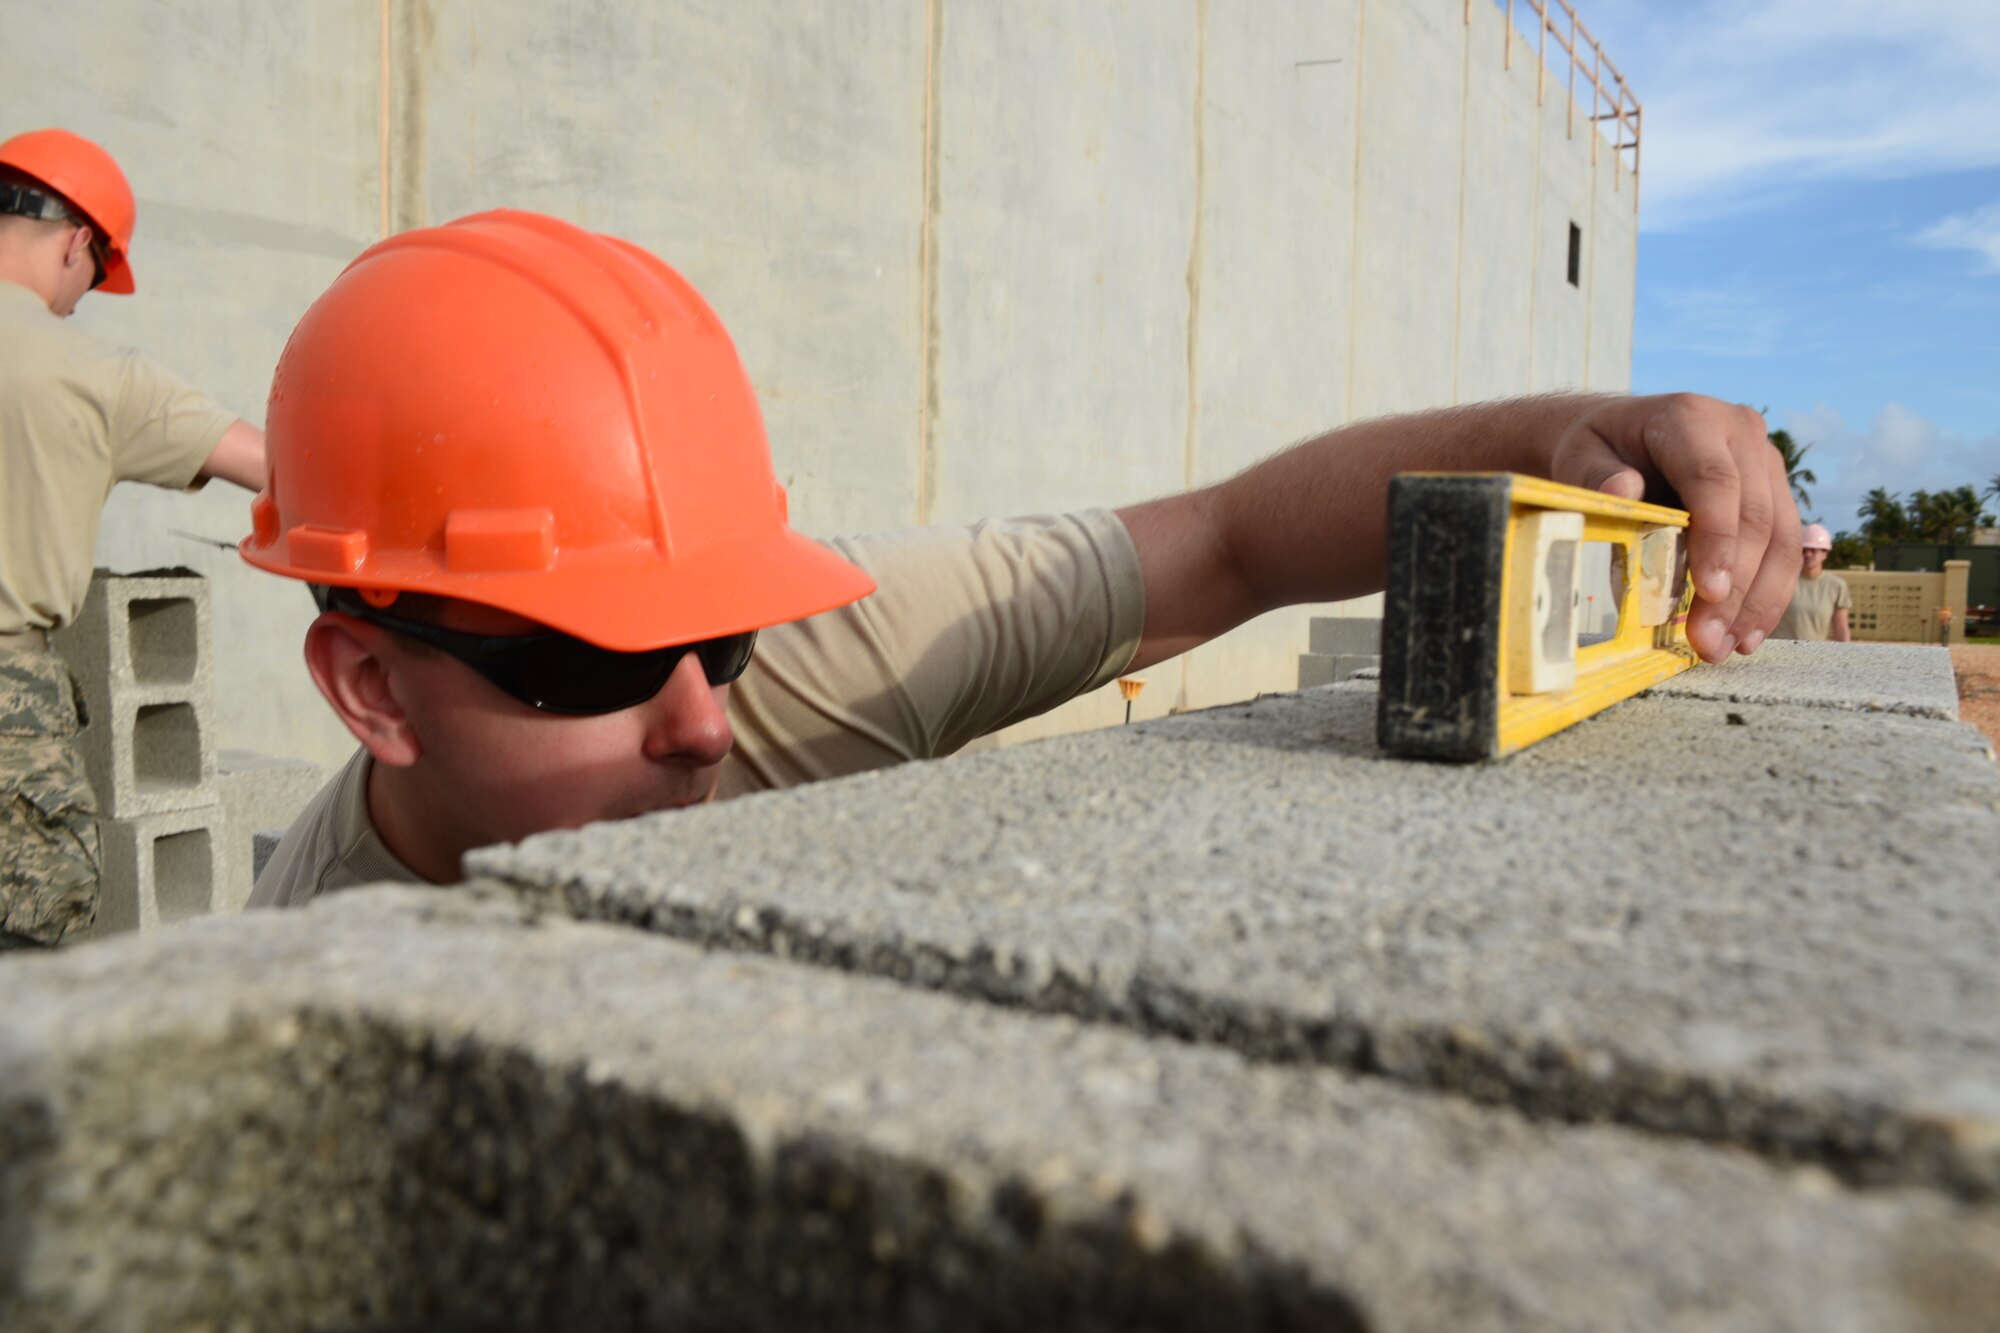 U.S. Air Force Senior Airman Ben Raymond, with the 157th Civil Engineering Squadron, New Hampshire Air National Guard, check the level of a cinder block while building a wall as part of the Commando Warrior Field Training Facility, Andersen Air Force Base, Guam, June 20, 2016. 157 CES Airmen are deployed to Guam for annual training where they are working on a construction project for the Pacific Command Regional Training Center.(Air National Guard photo by Airman 1st Class Ashlyn J. Correia) 